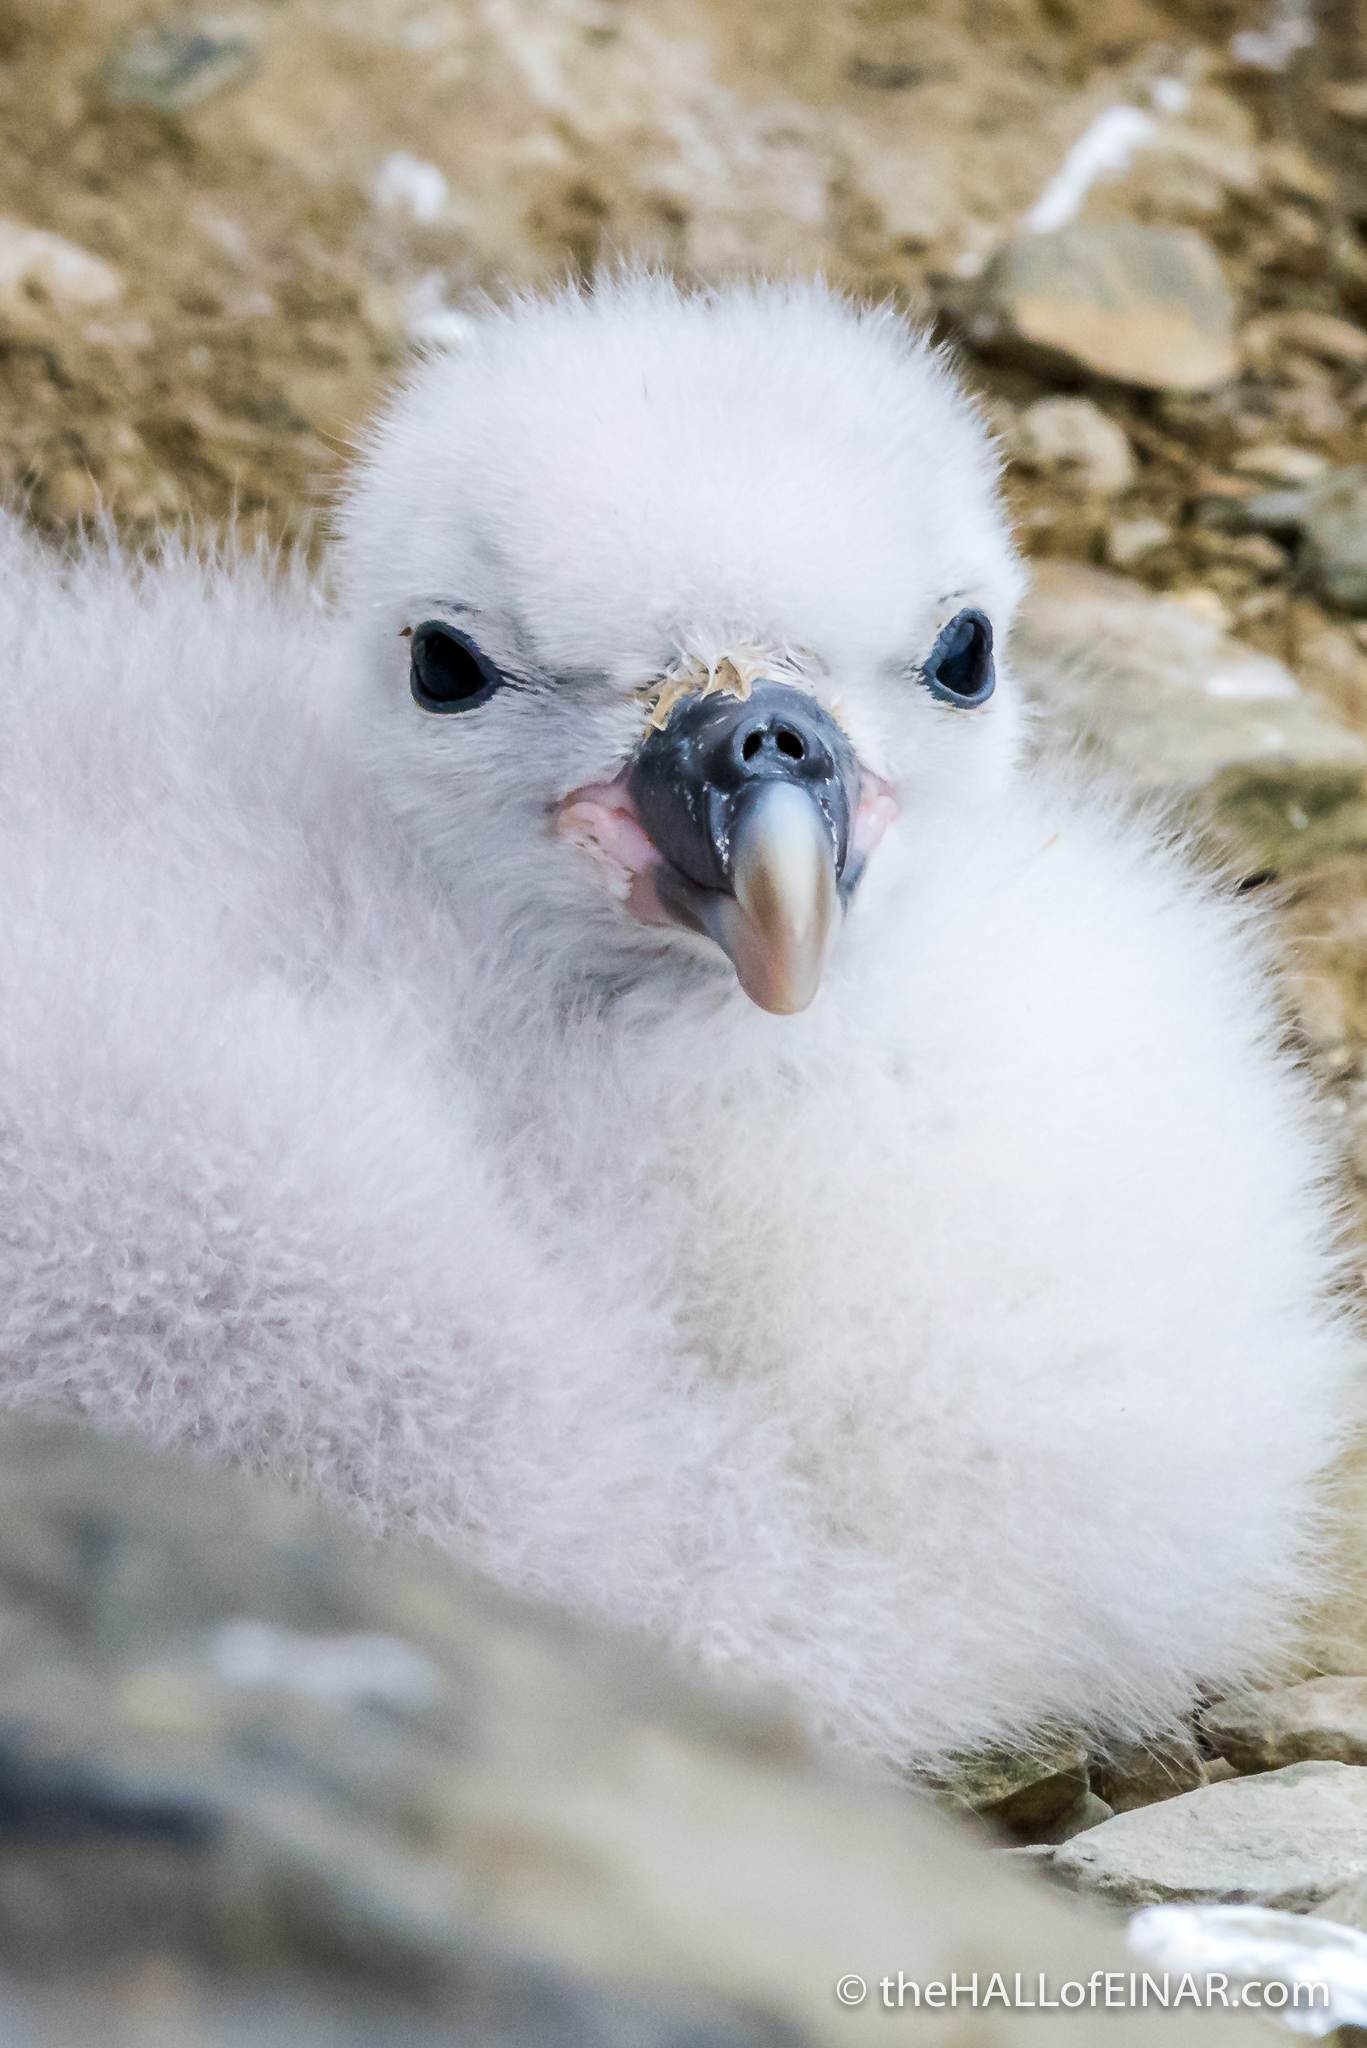 Fulmar Chick - The Hall of Einar - photograph (c) David Bailey (not the)